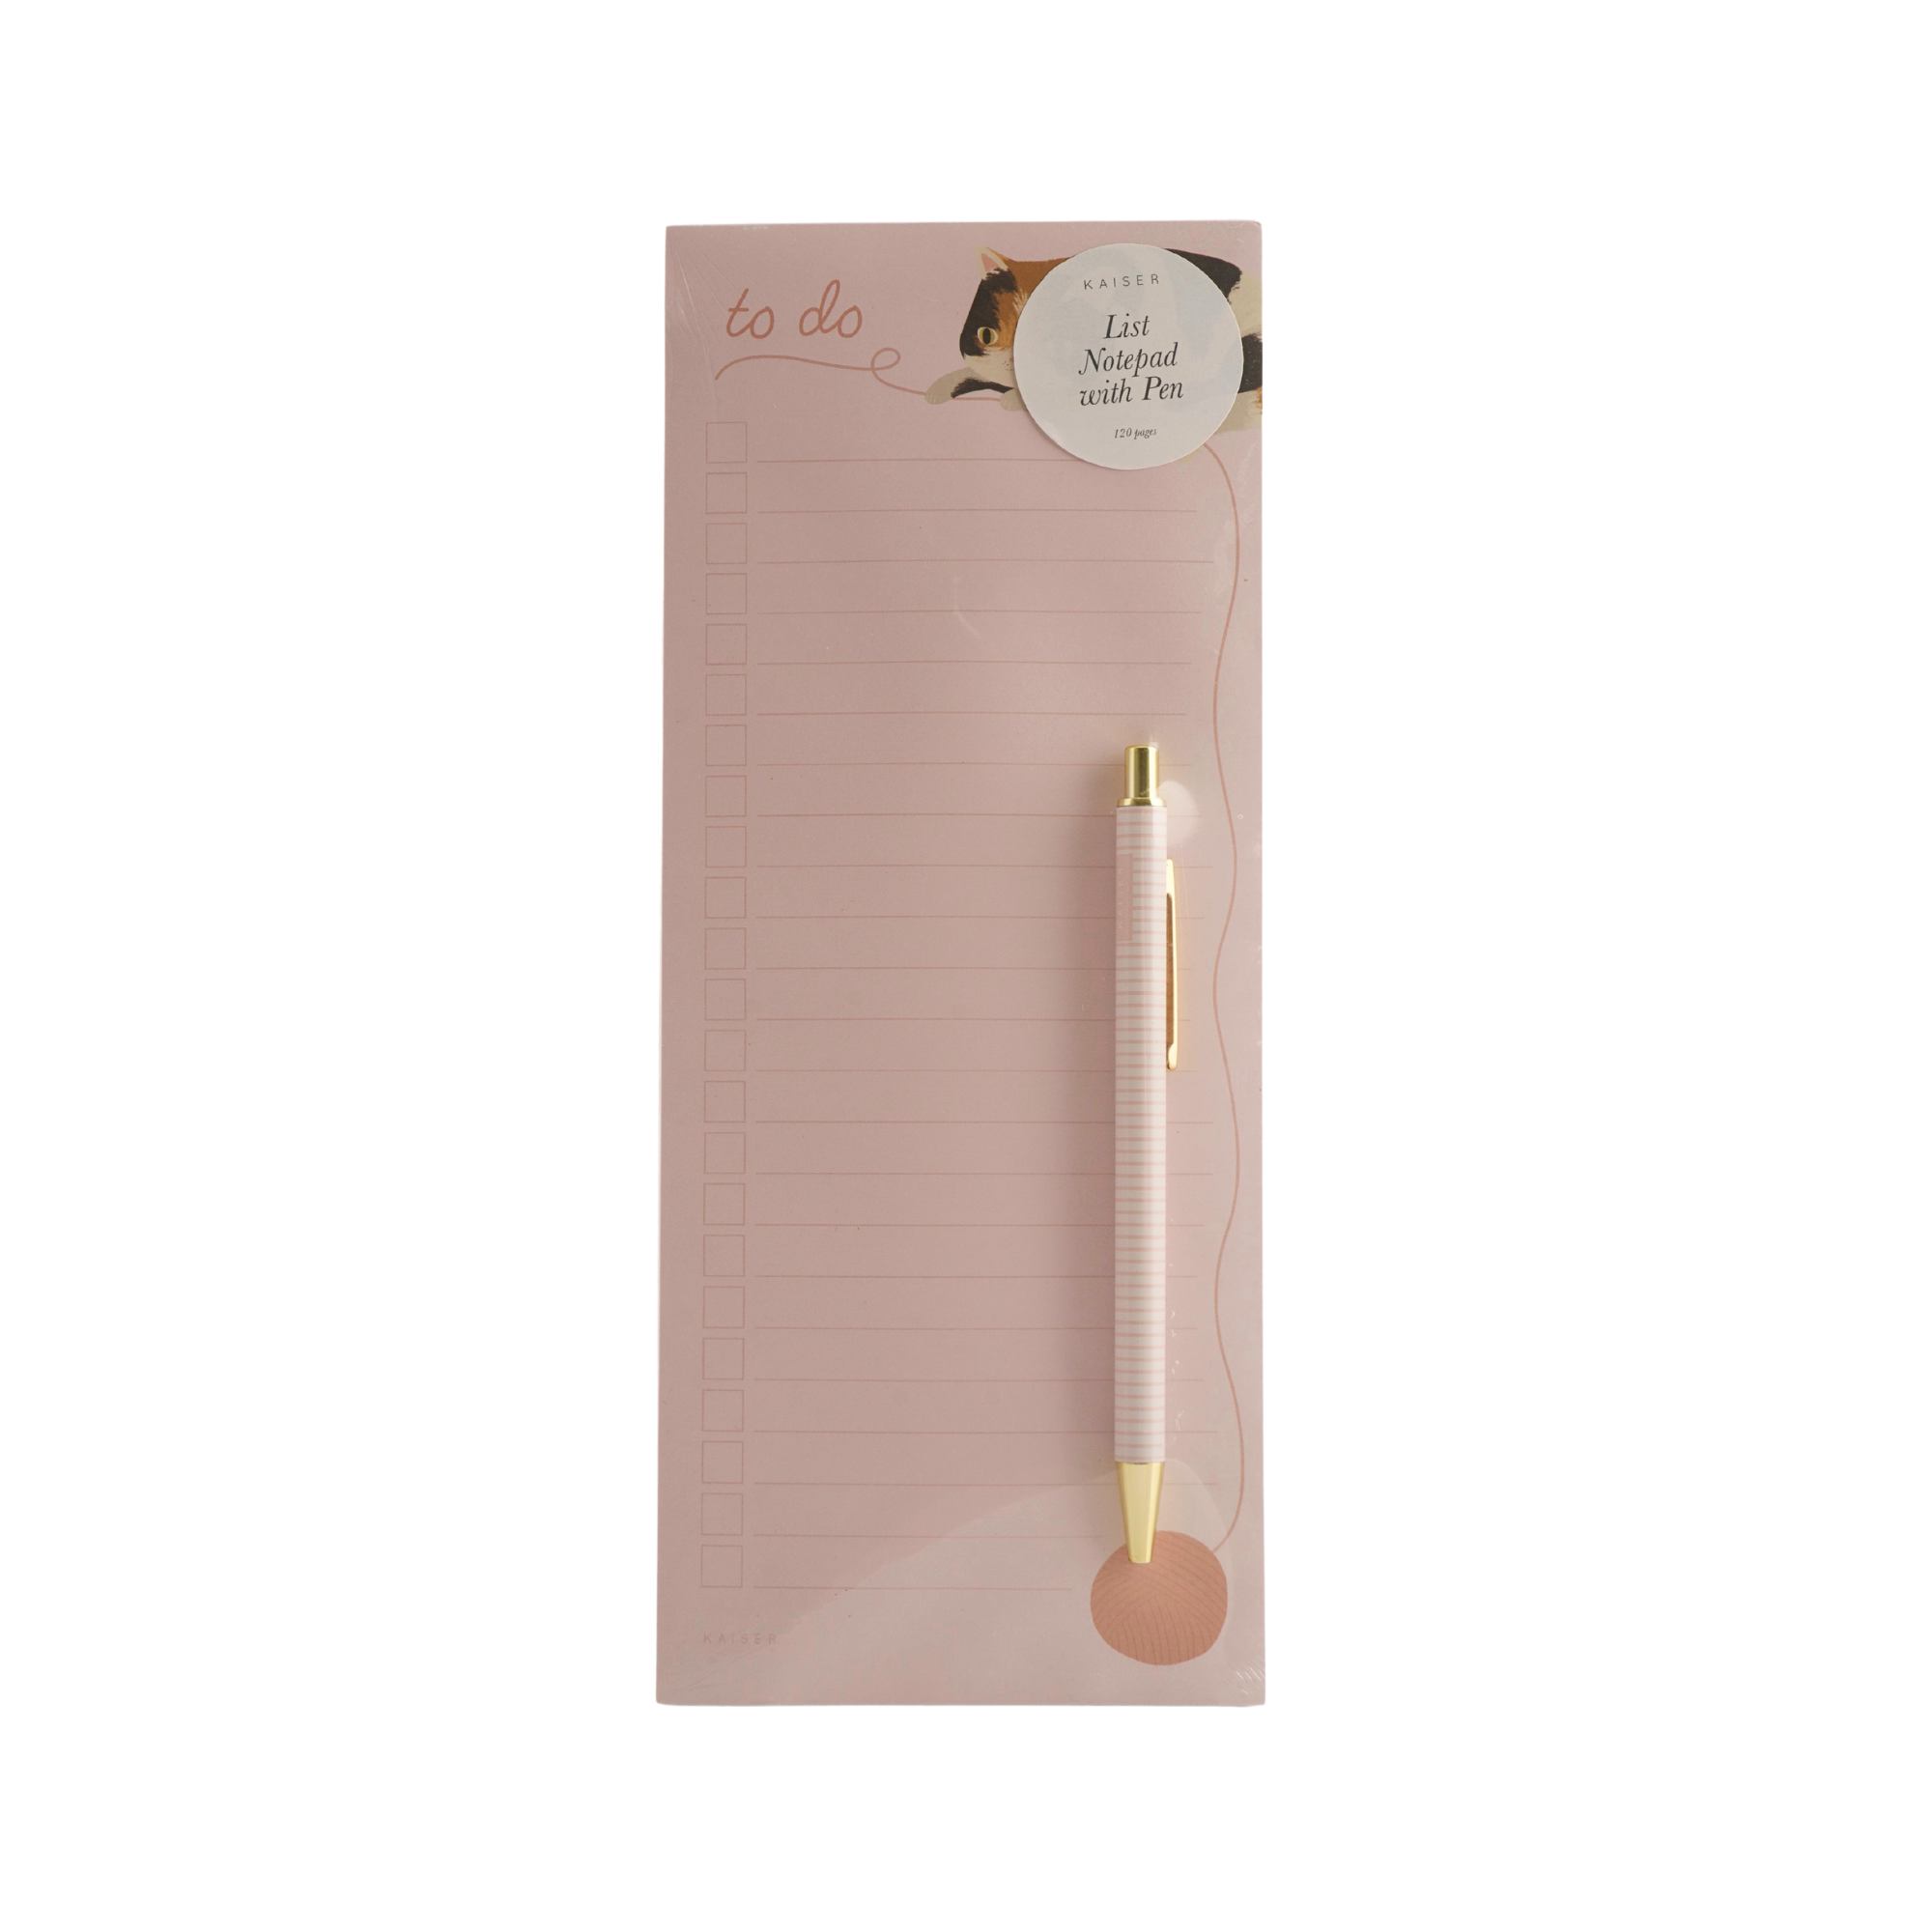 List Notepad With Pen - Cute Cat